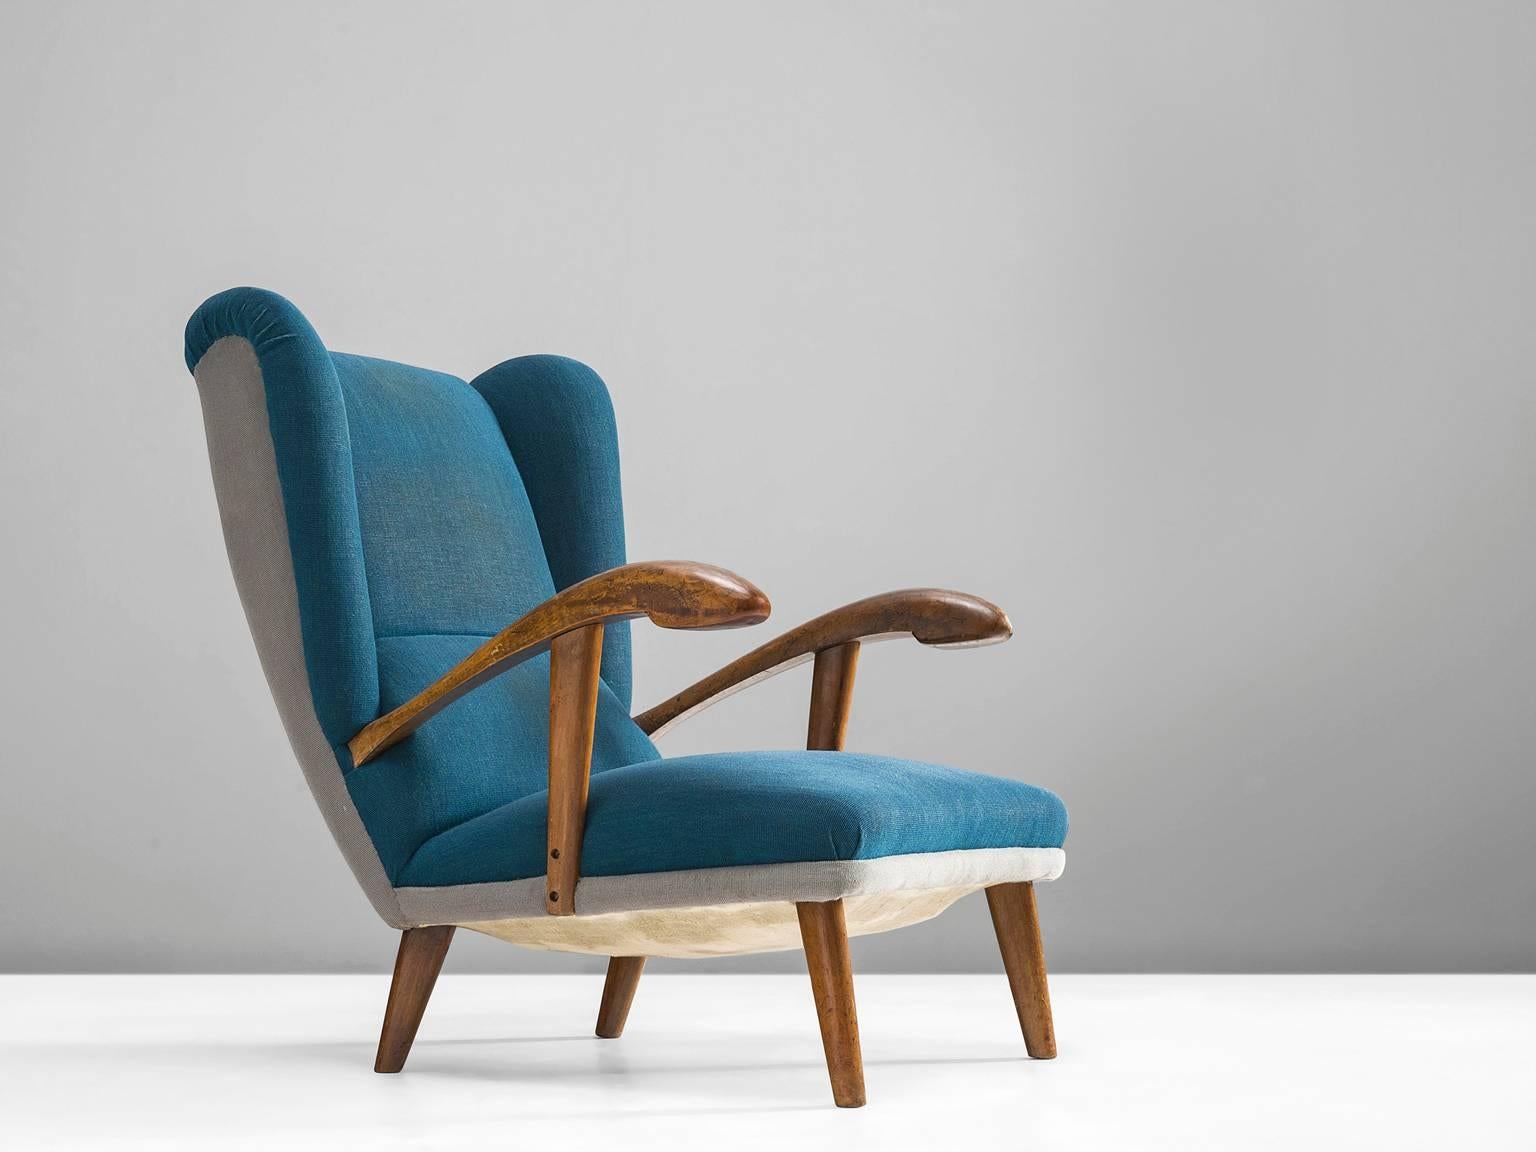 Easy chair, wood, blue and white fabric, Europe, 1940s

This strong, playful wingback chair is designed with a slightly tilted back in order to provide sitting comfort. The wooden armrests are pointing upwards and flow gracefully from the backrest